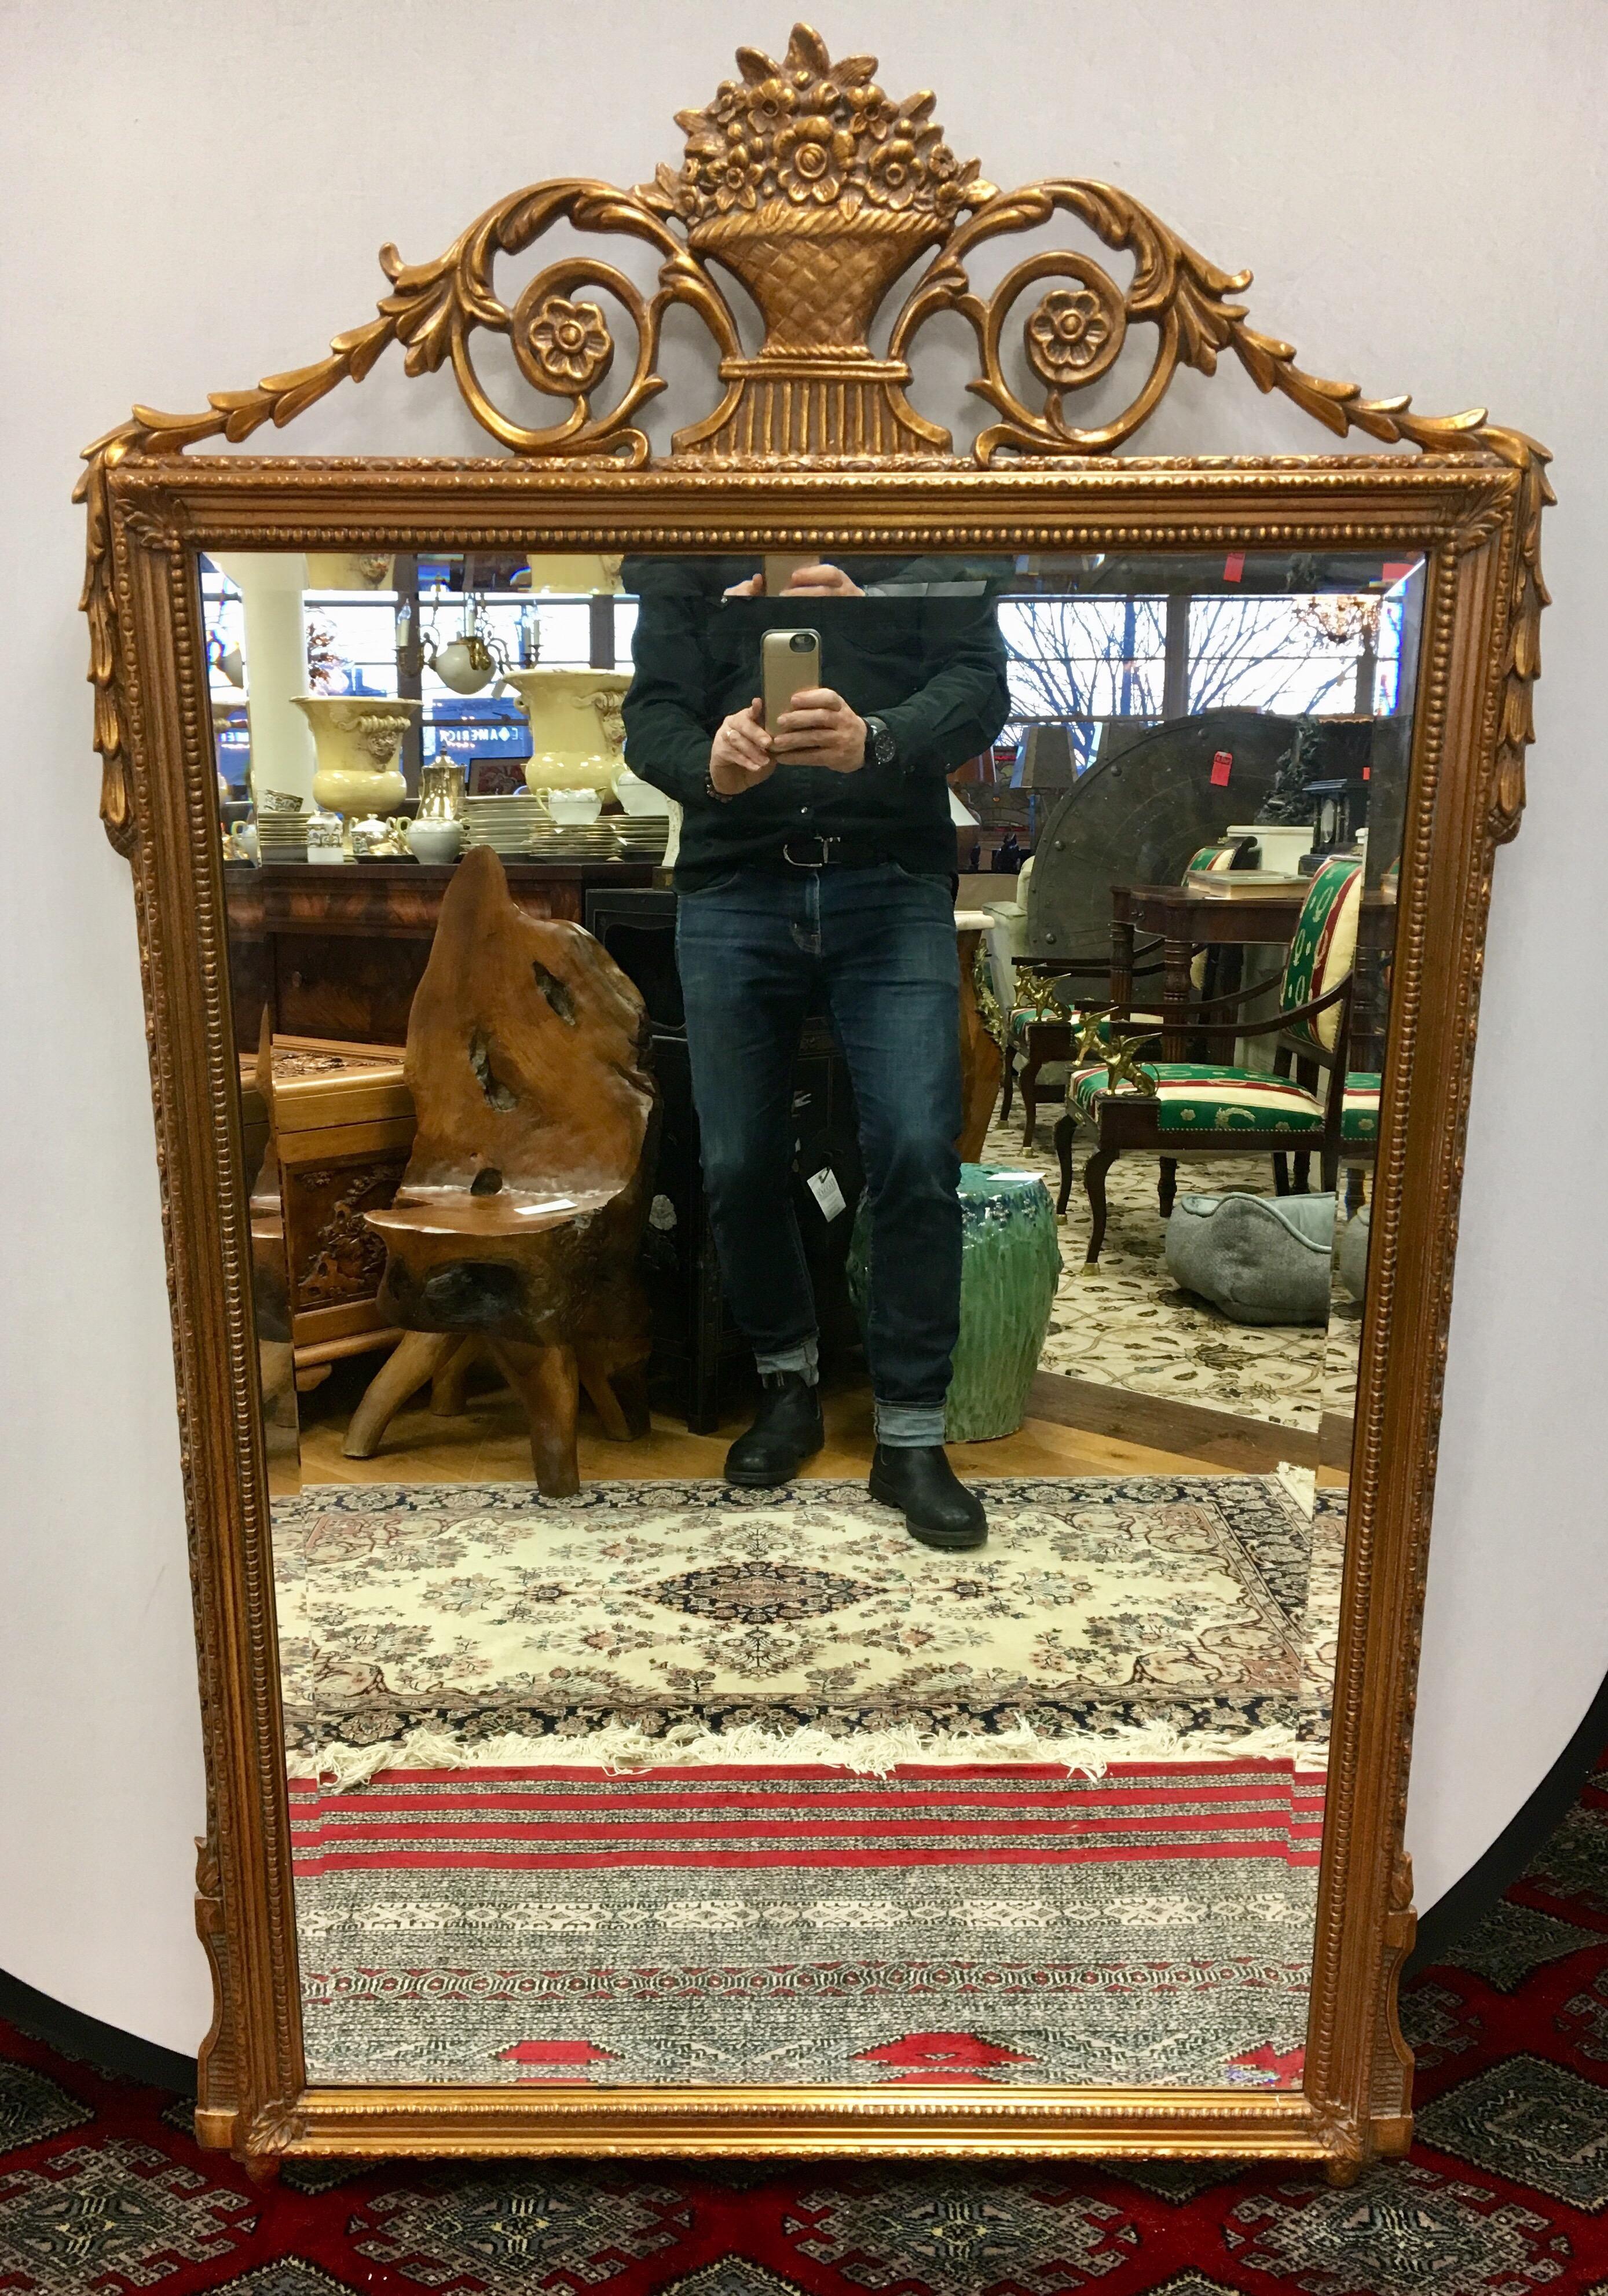 Intricately carved gilt mirror with Horn of plenty medallion at top and carved wreaths descending from top. Mirror is beveled and in perfect shape.